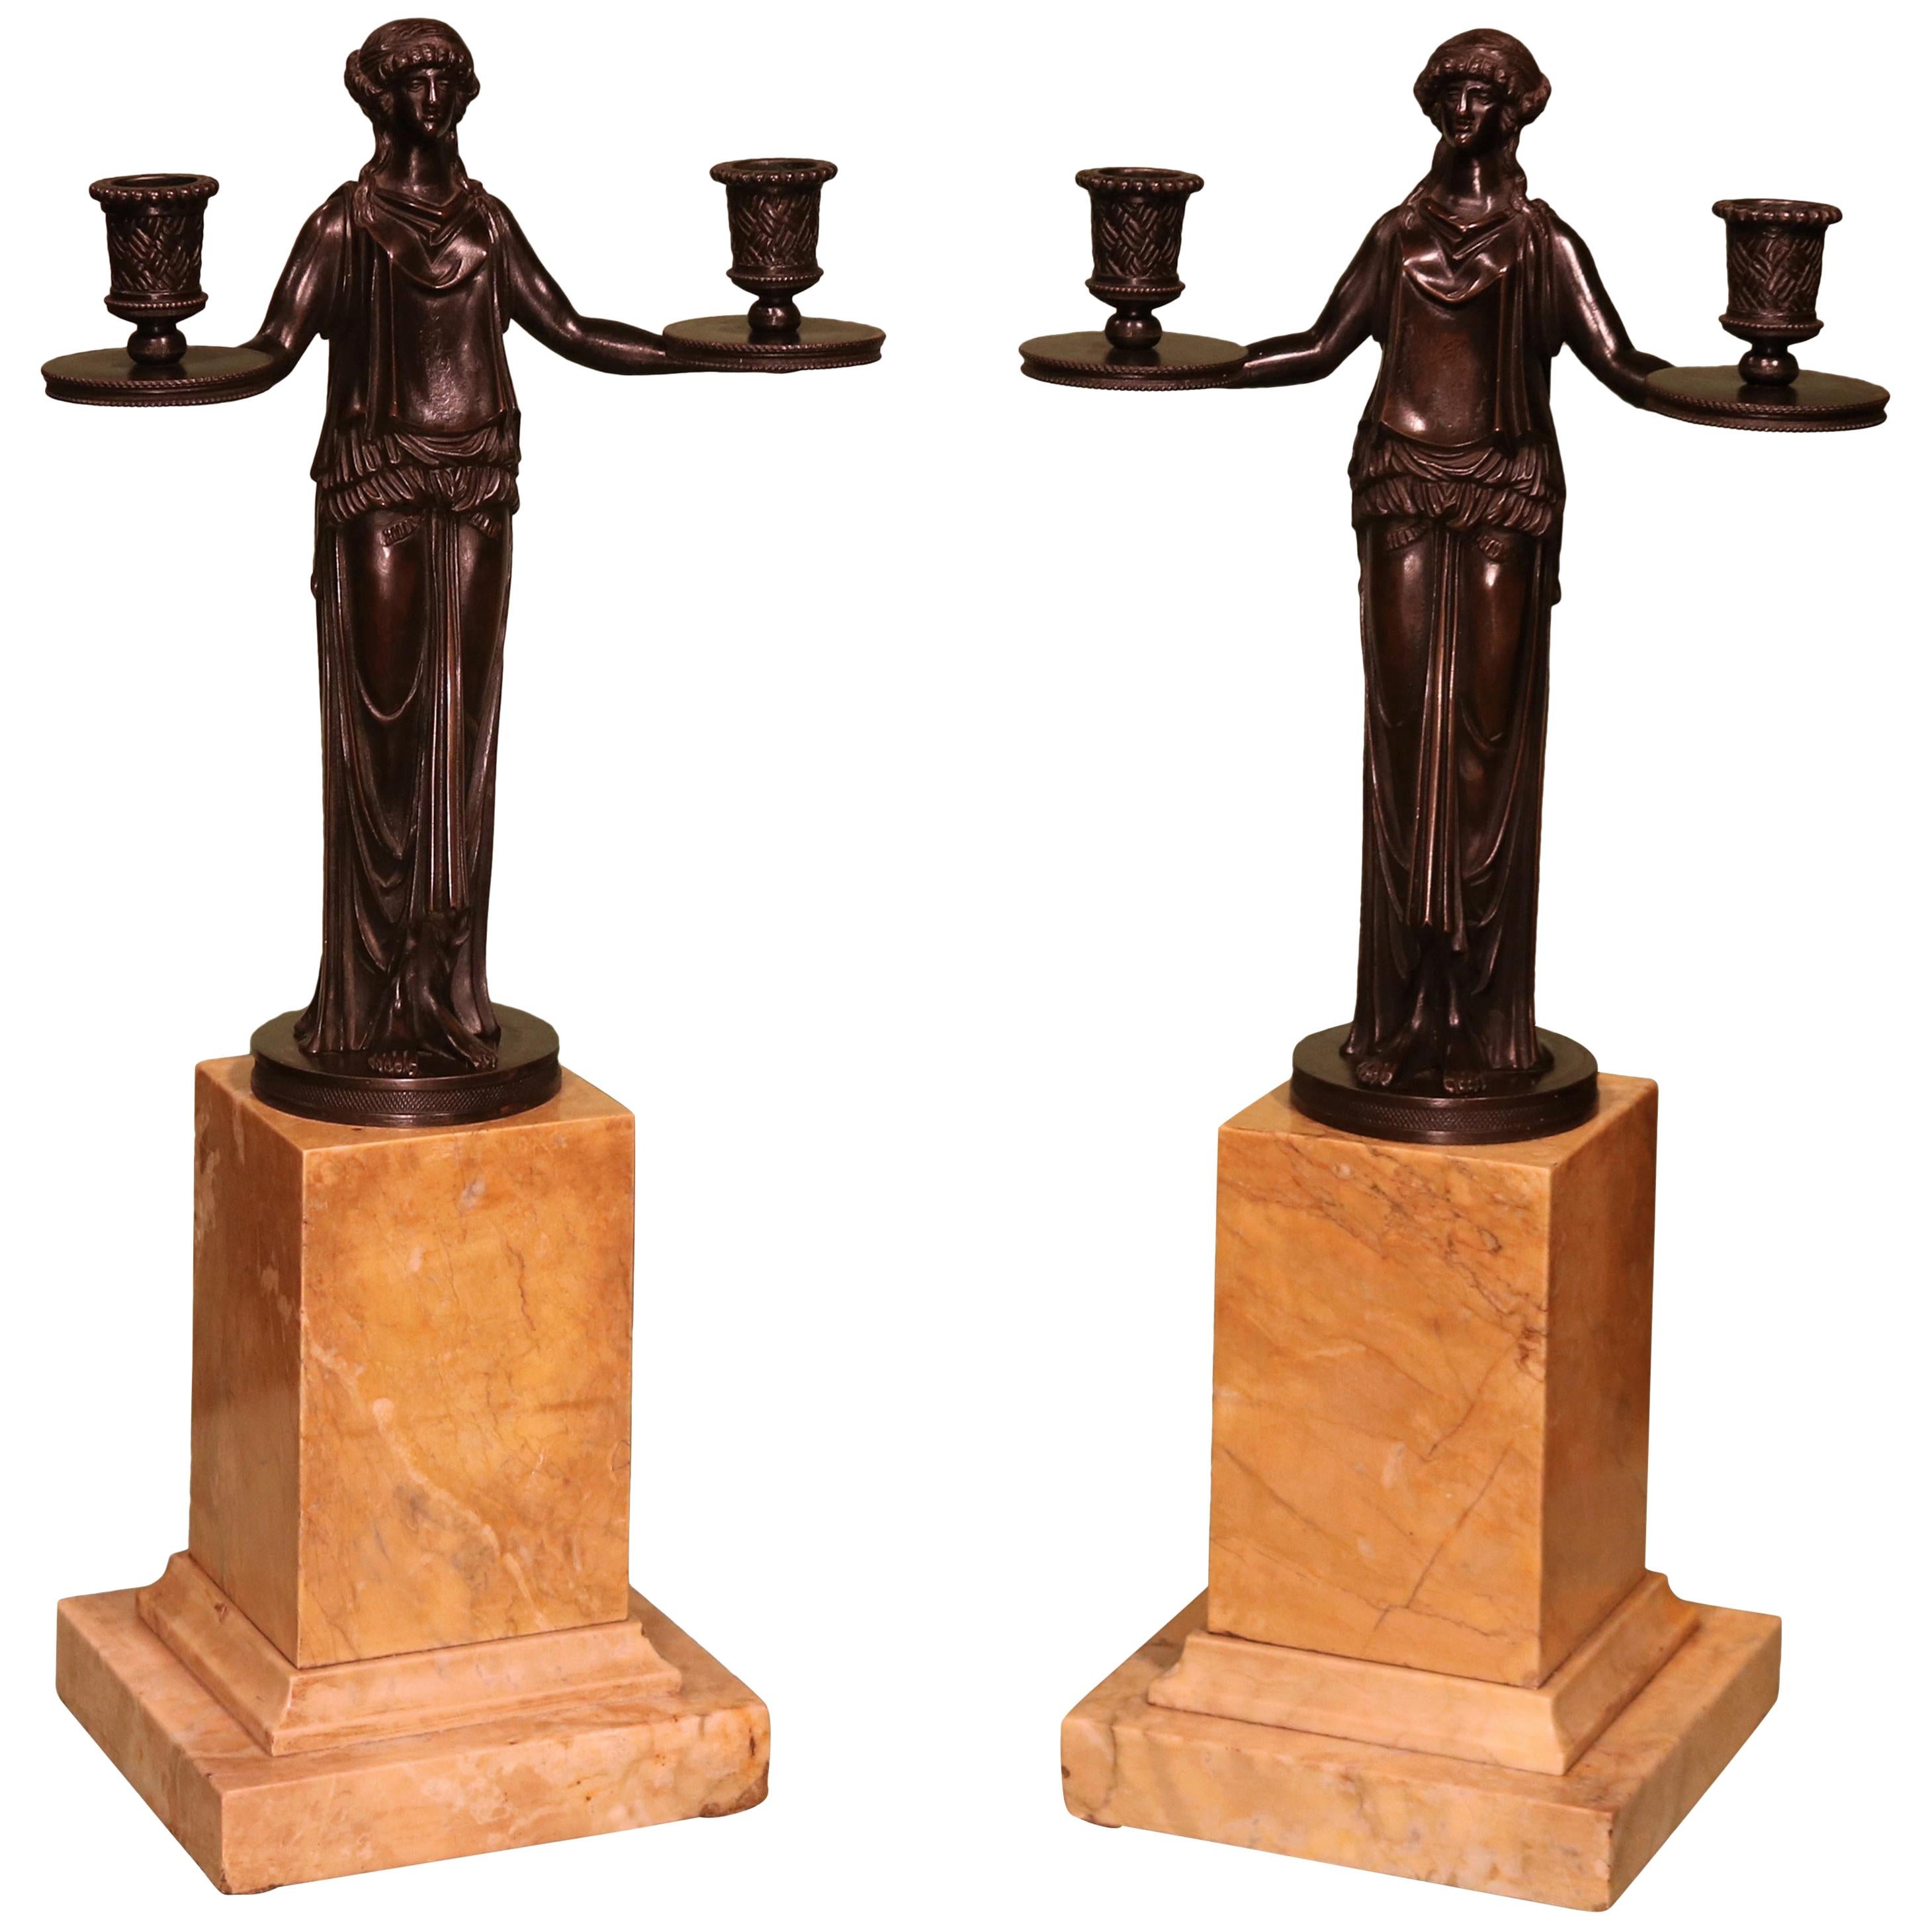 19th Century Two-Light Bronze and Marble Candelabra in the manner of Thomas Hope For Sale